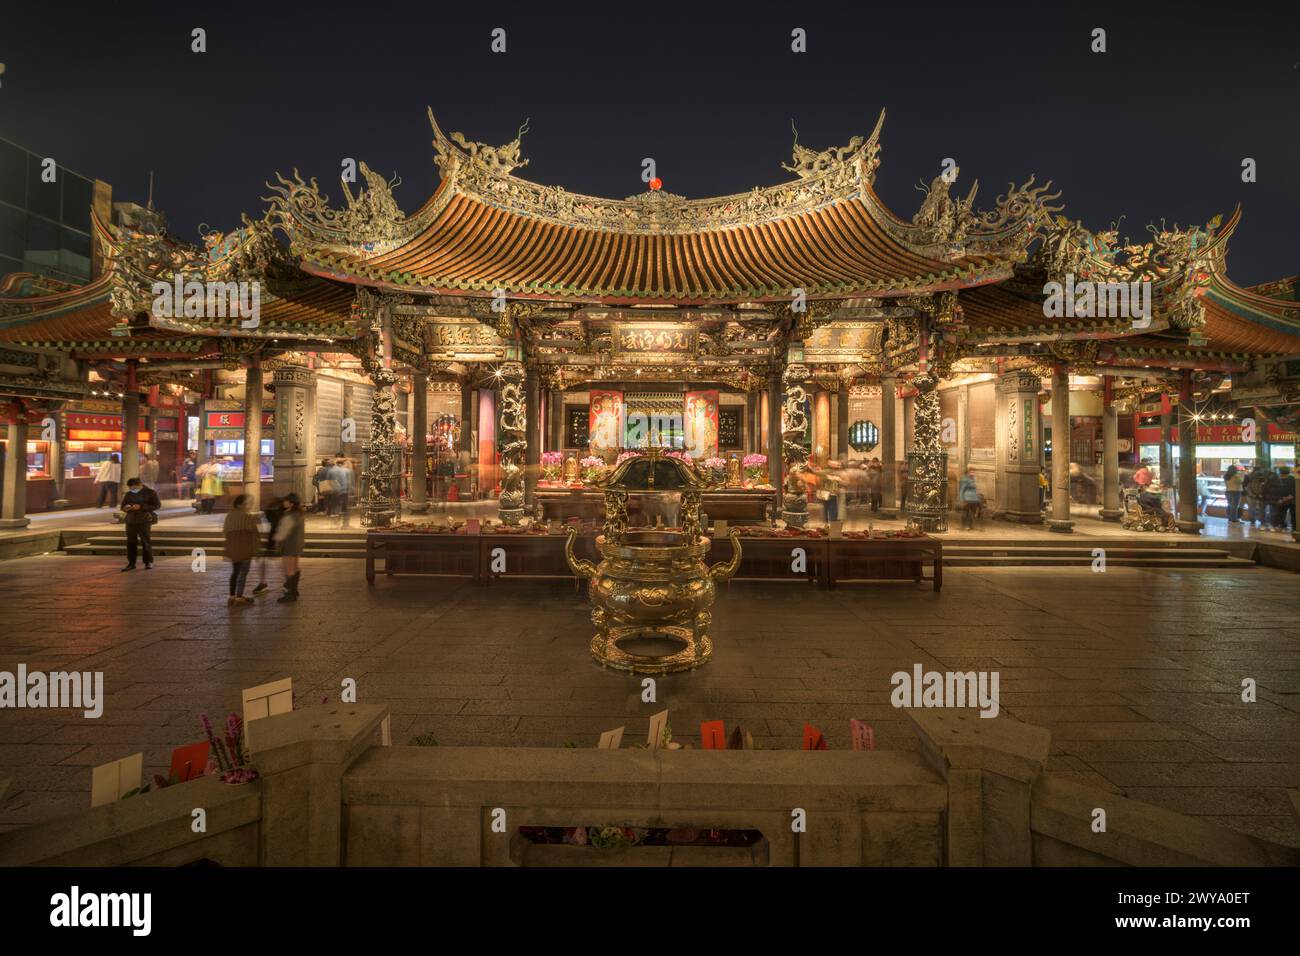 The photo features a richly decorated Longshan temple front gate with intricate carvings and bustling with worshippers at night Stock Photo